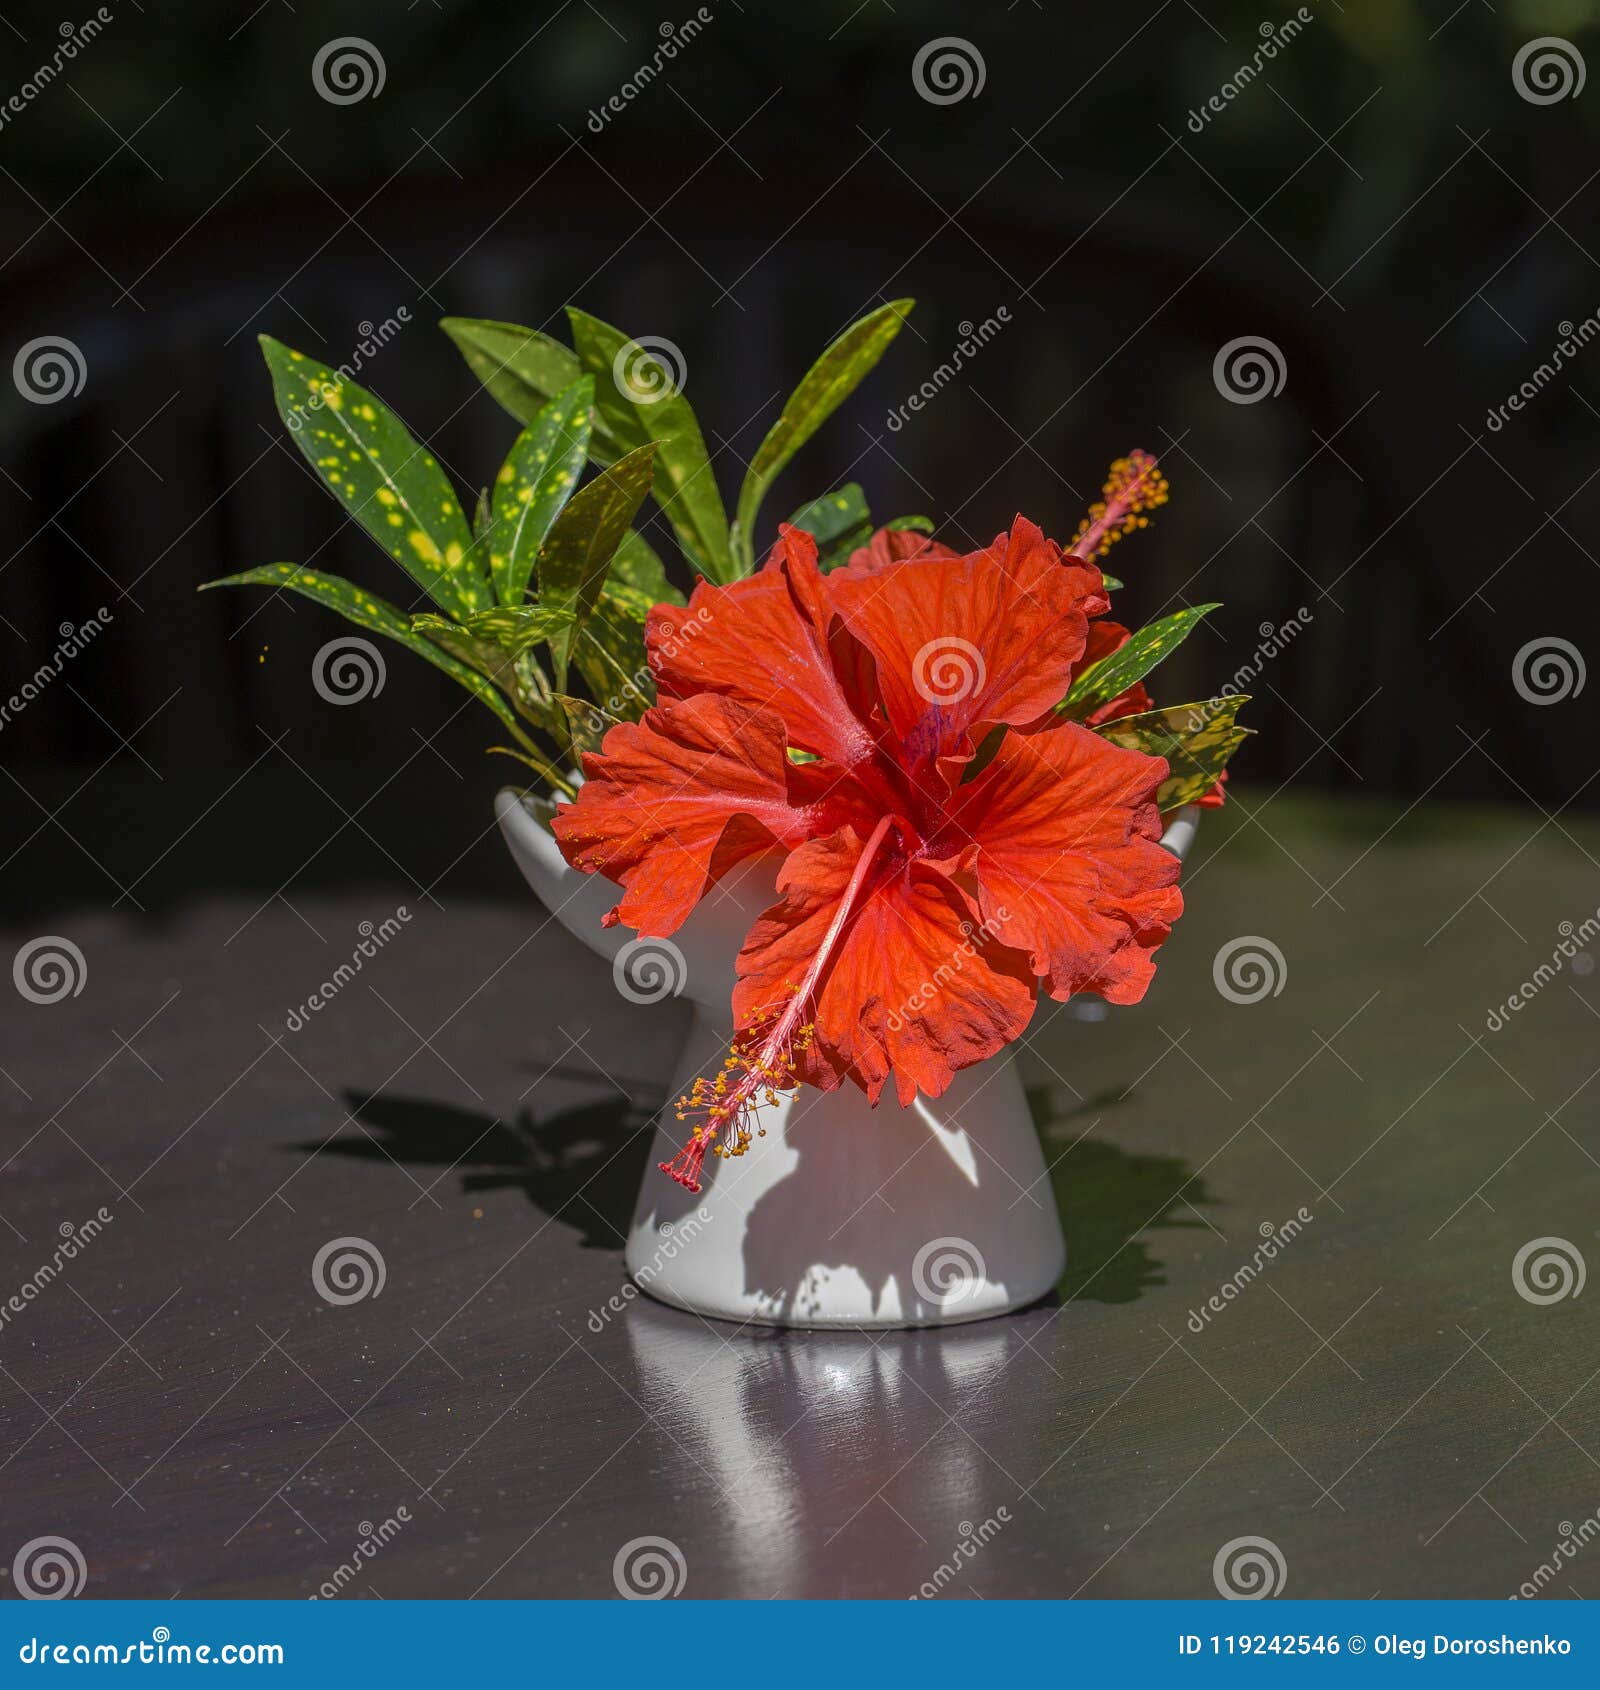 Bouquet Of Red Tropical Flowers In White Ceramic Vase Stands In Wooden Table Bali Indonesia Close Up Stock Photo Image Of Indonesia Interior 119242546